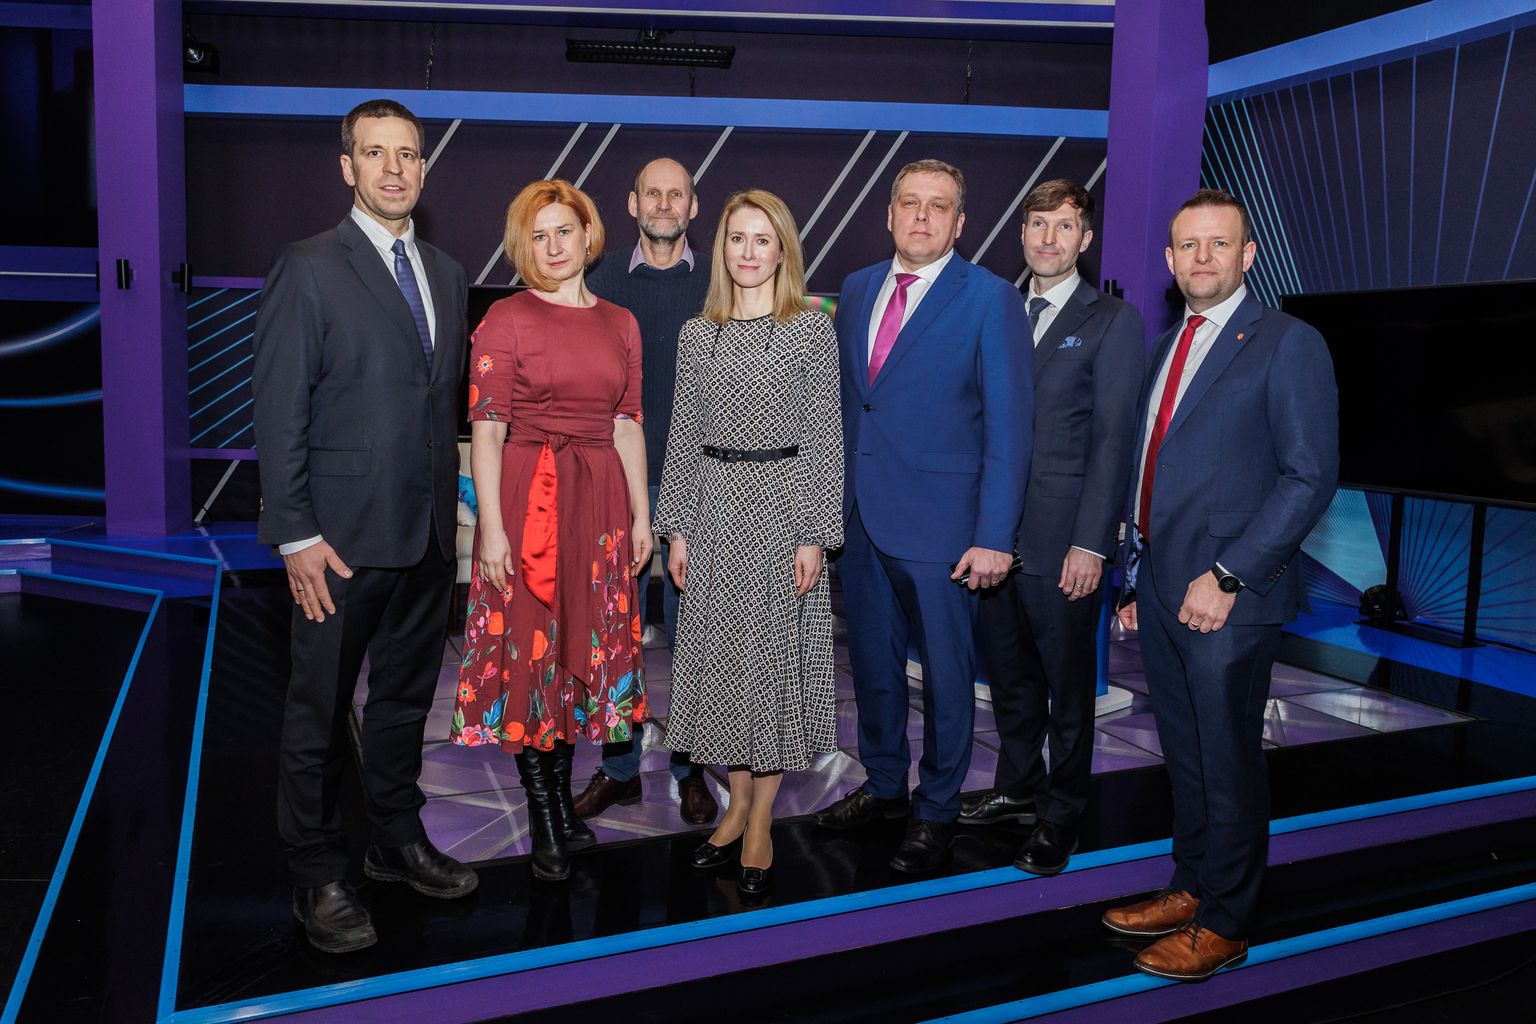 From the left. Head of the Center Party Jüri Ratas, head of the Parempoolsed (Right-wingers) Lavly Perling, head of the Isamaa Helir-Valdor Seeder, head of the Reform Party Kaja Kallas, head of the Estonia 200 Lauri Hussar, head of the Estonian Conservative People's Party (EKRE) Martin Helme and head of the Social Democratic Party (SDE) Lauri Läänemets.